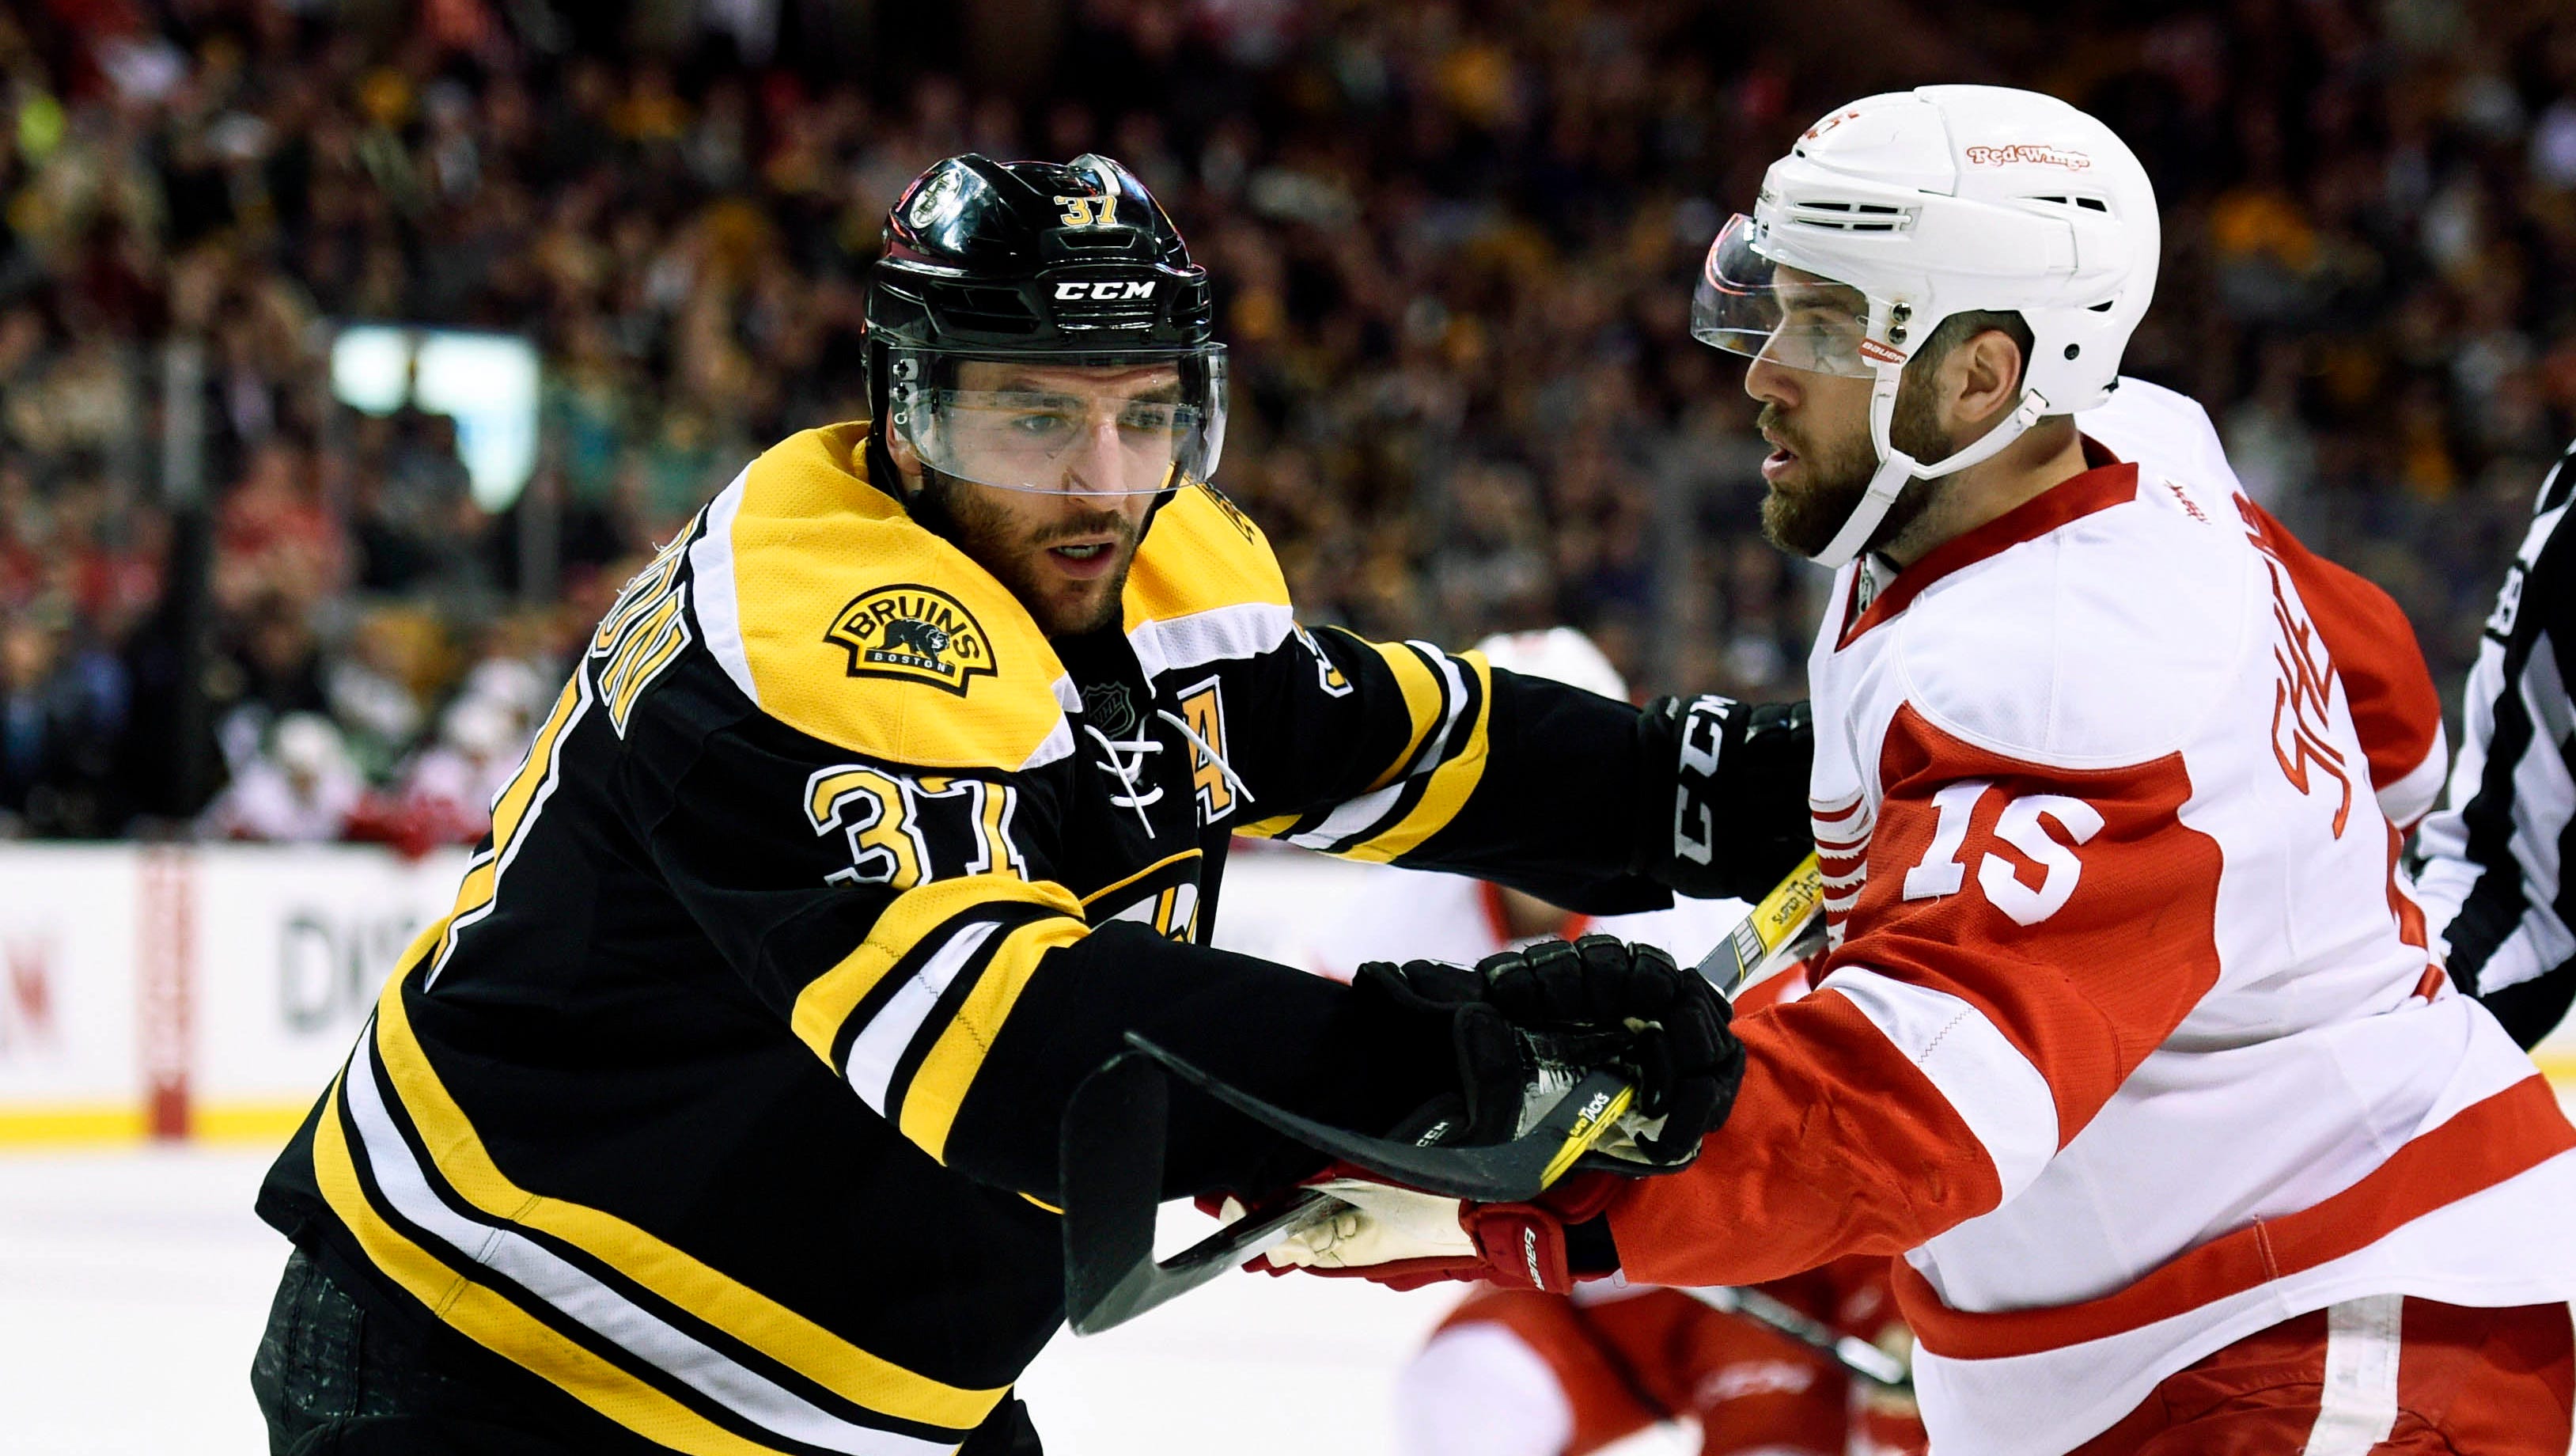 Bruins center Patrice Bergeron (37) battles with Red Wings center Riley Sheahan (15) after a face-off during the first period of the Wings' 5-2 loss Thursday in Boston.